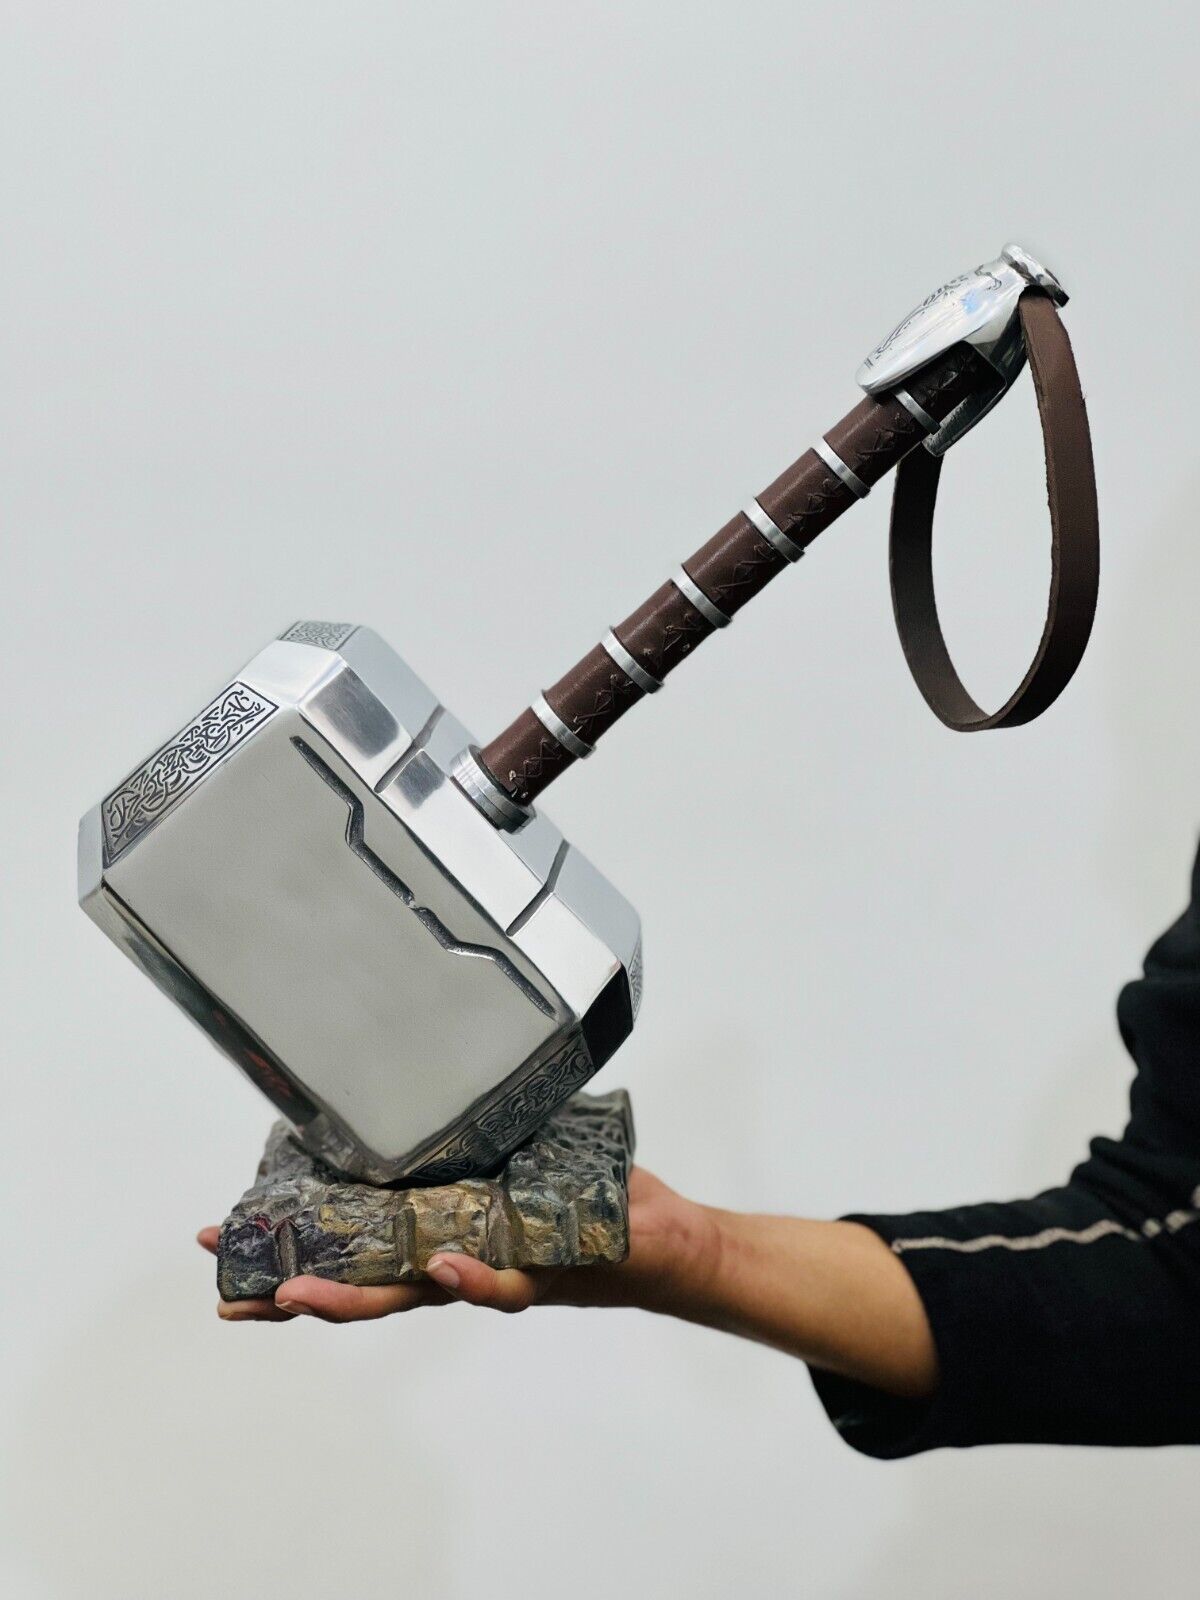 Avengers Thor Hammer Replica Thor Mjolnir Metal Hammer Cosplay Prop With Stand